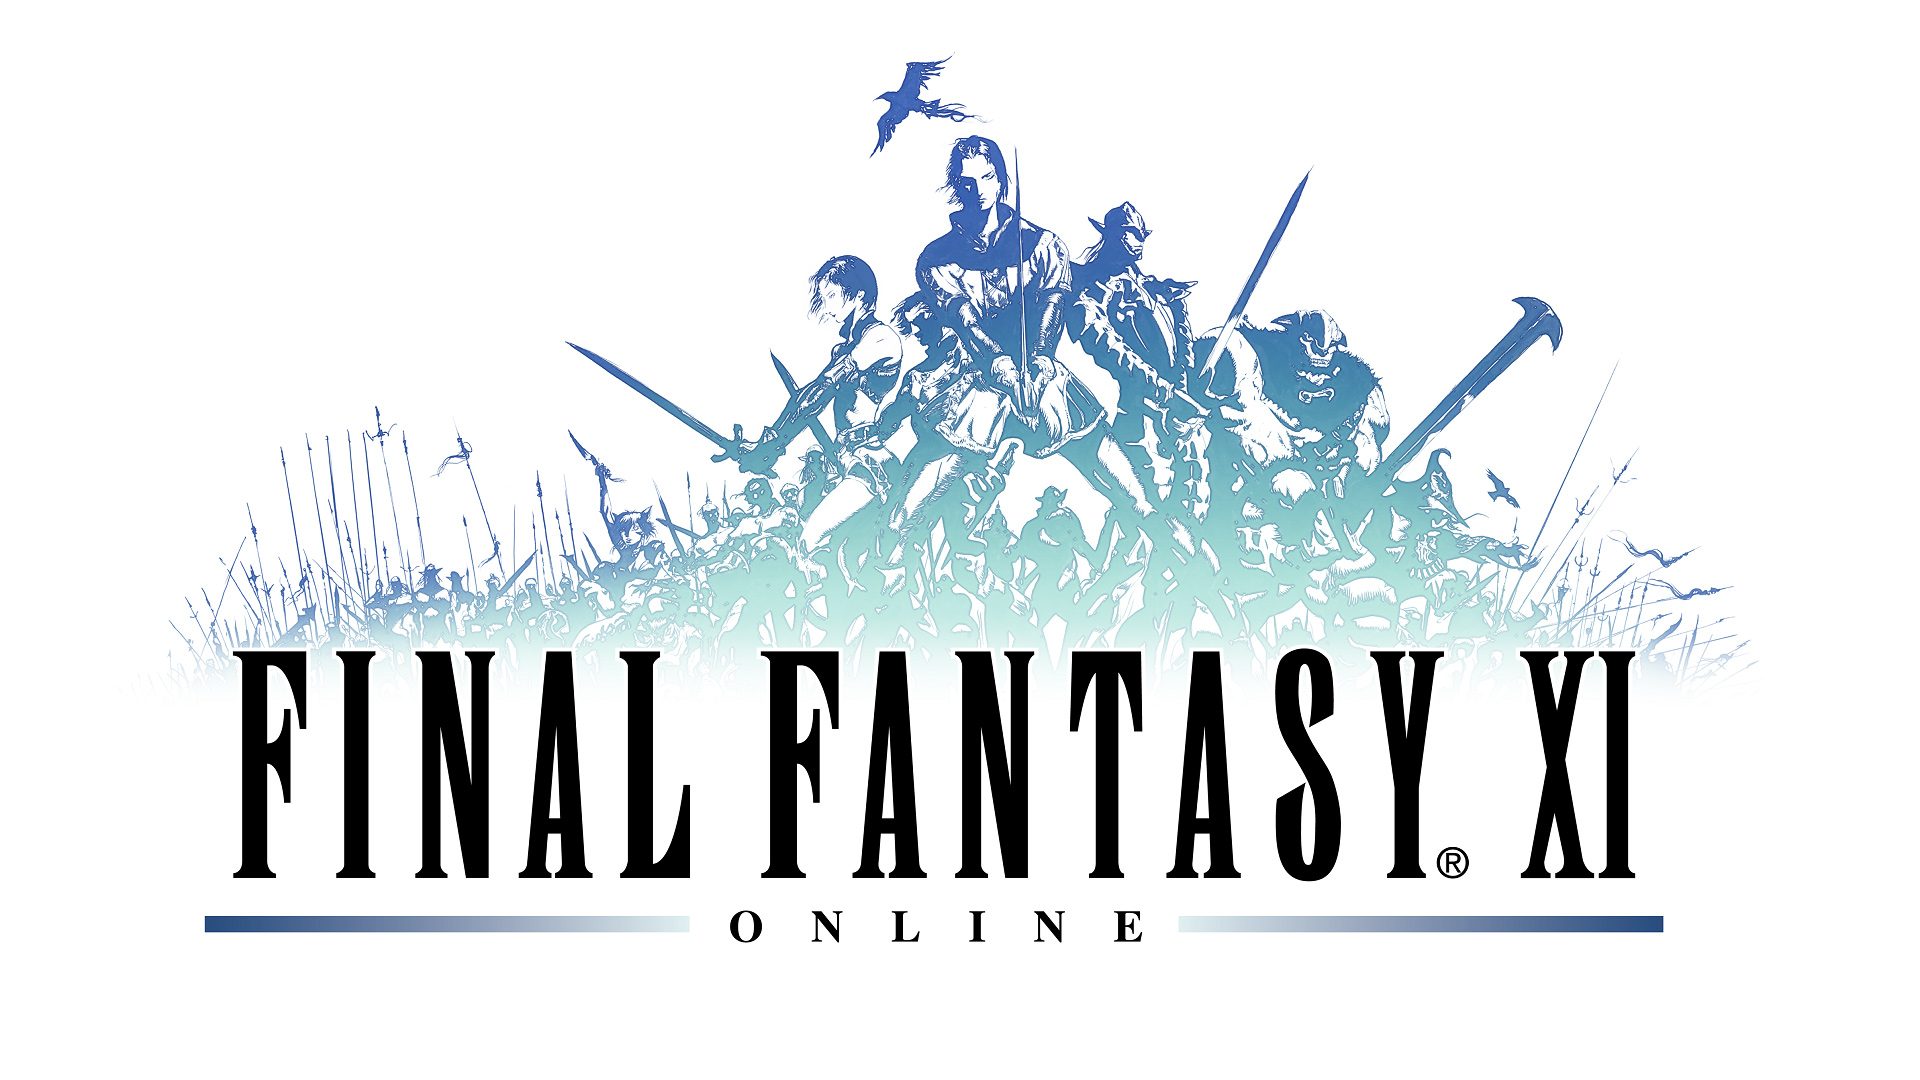 Final Fantasy XI Online (Not for Resale) - Video Games » Sony